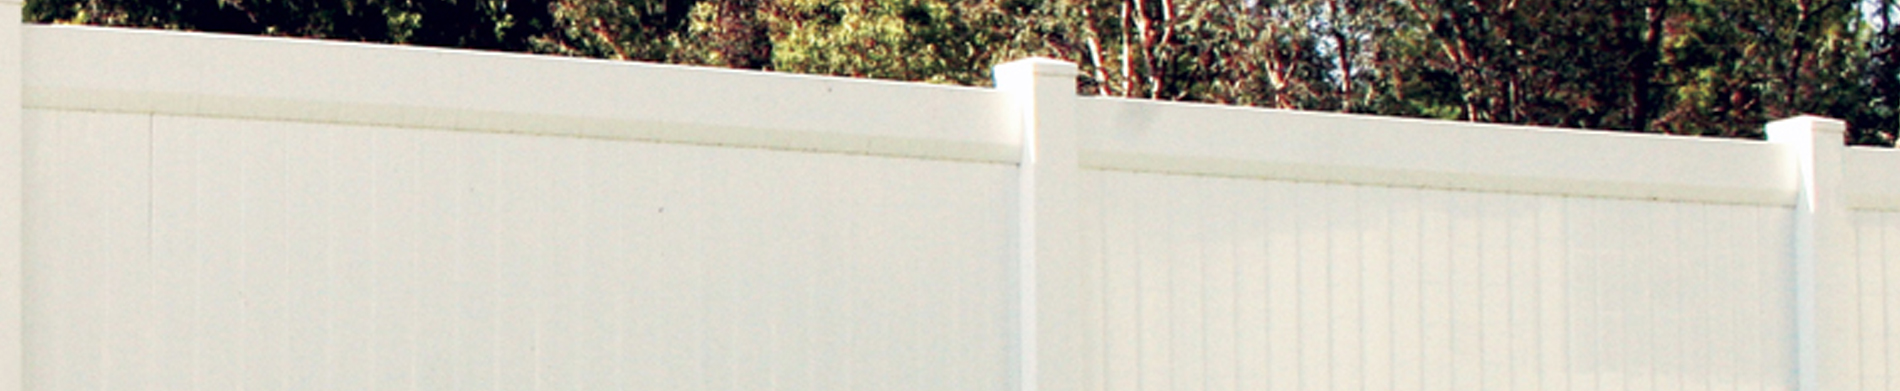 Your property can stand out if you install a vinyl fence around it – Invest in a colorful or a white color fence